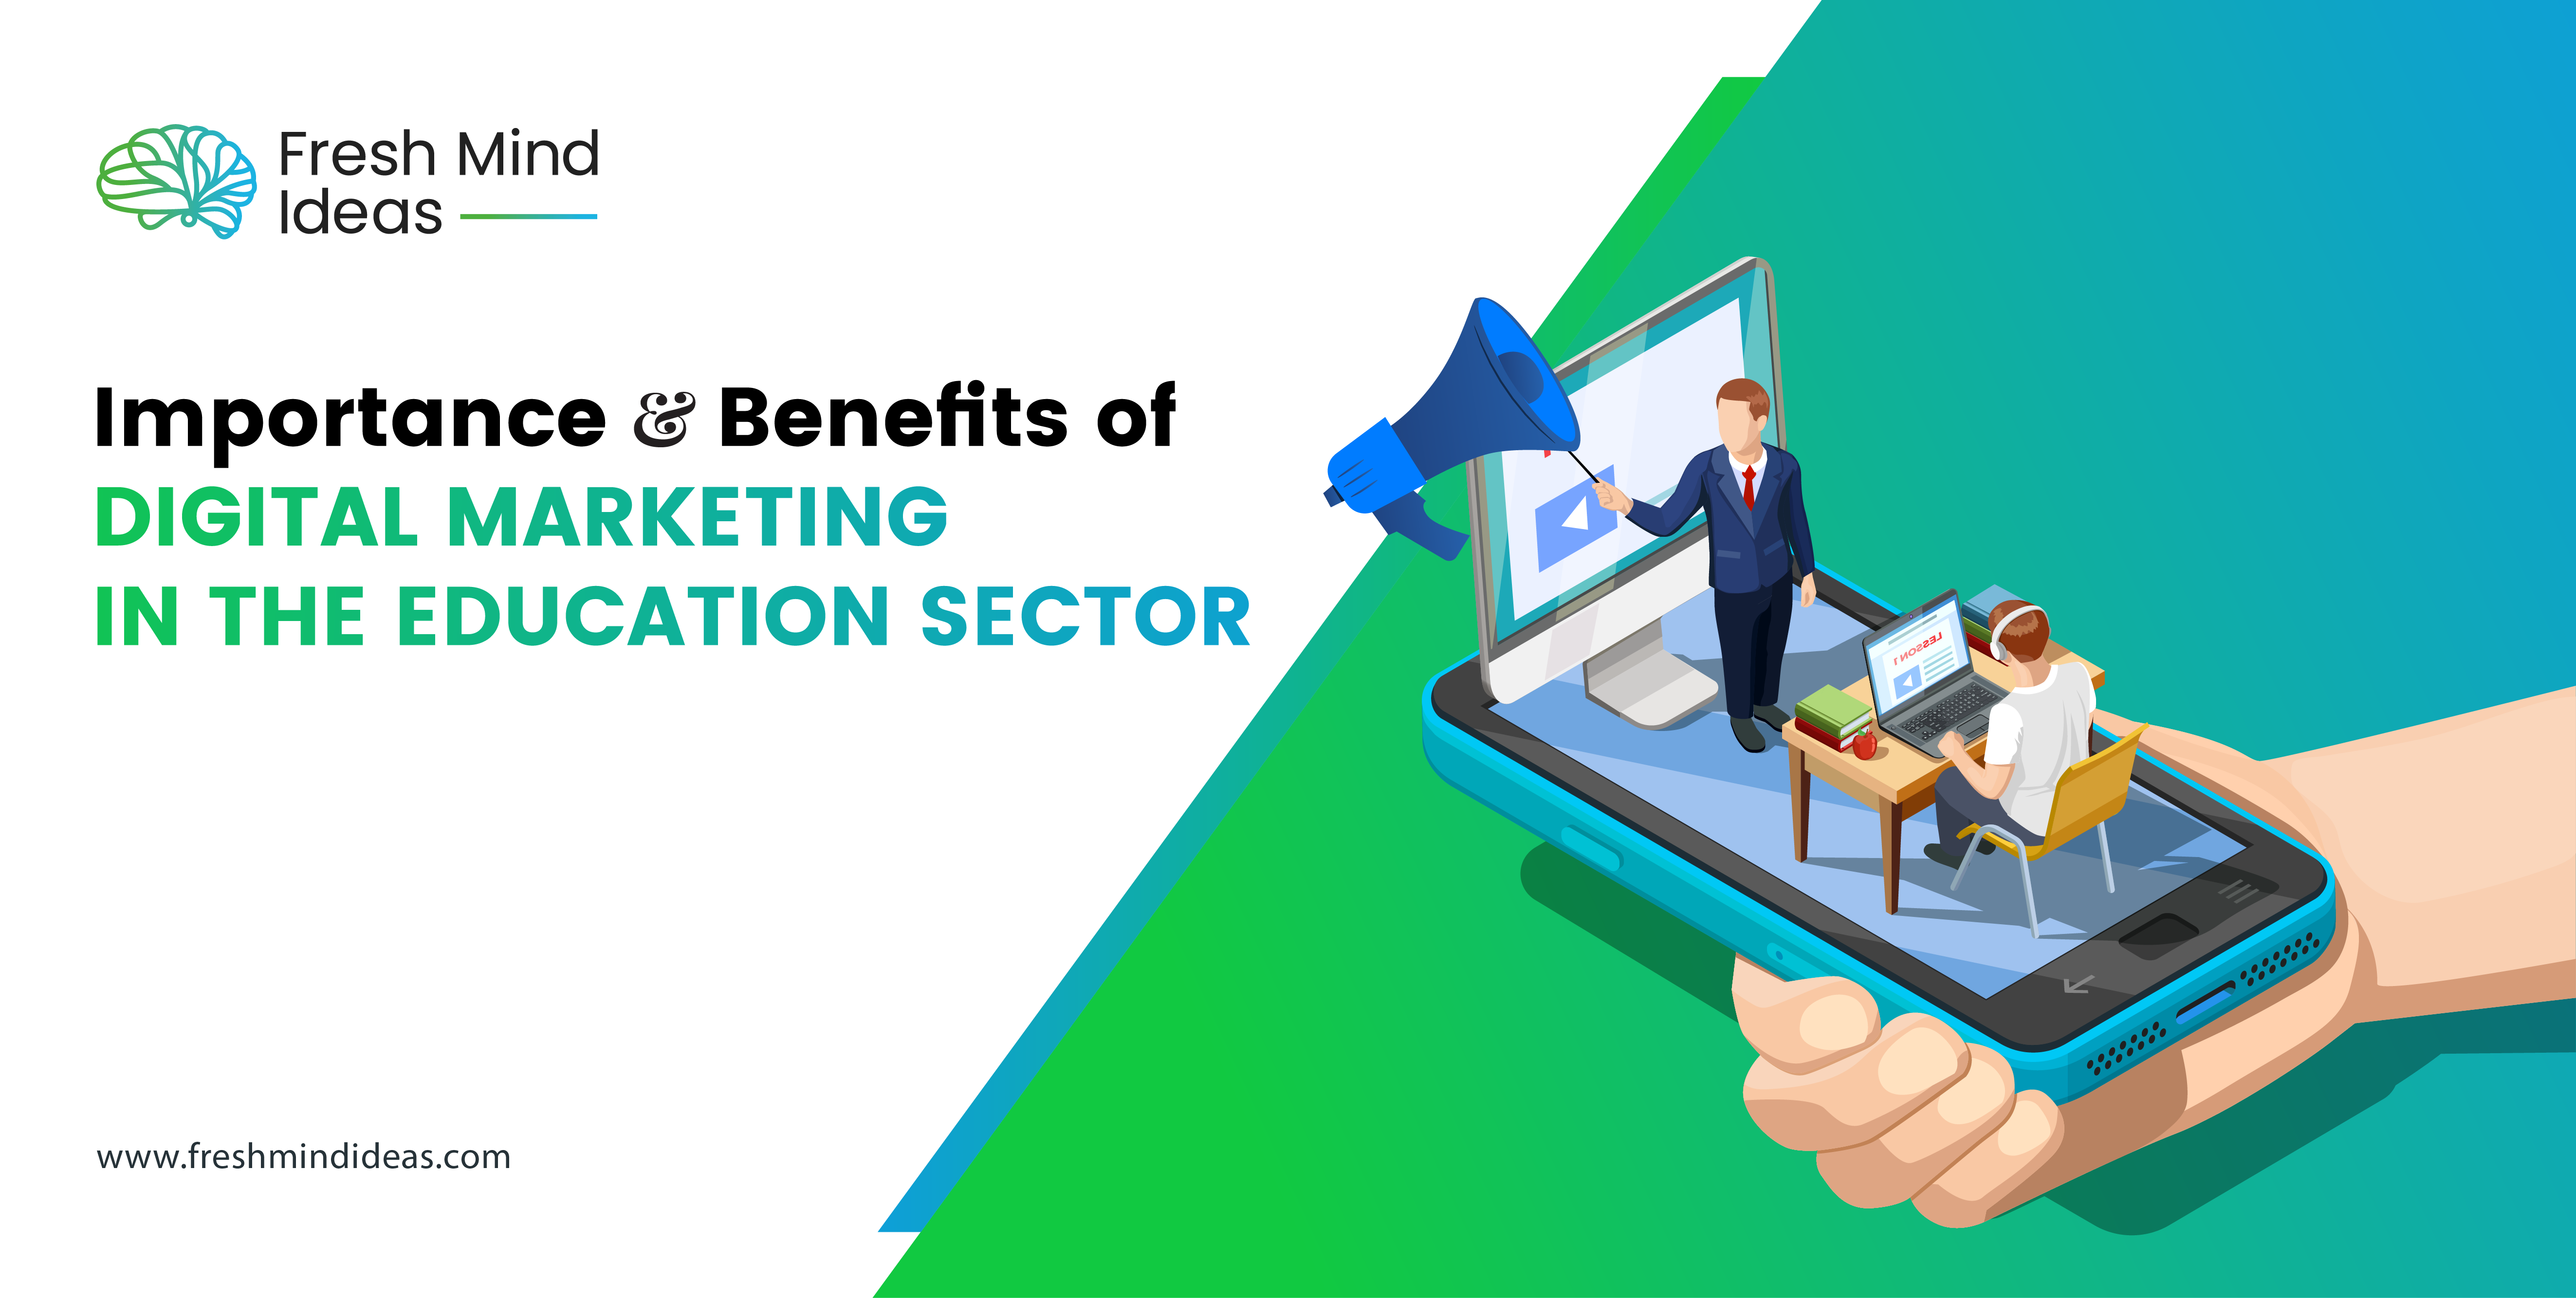 Importance & Benefits of Digital Marketing in the Education Sector